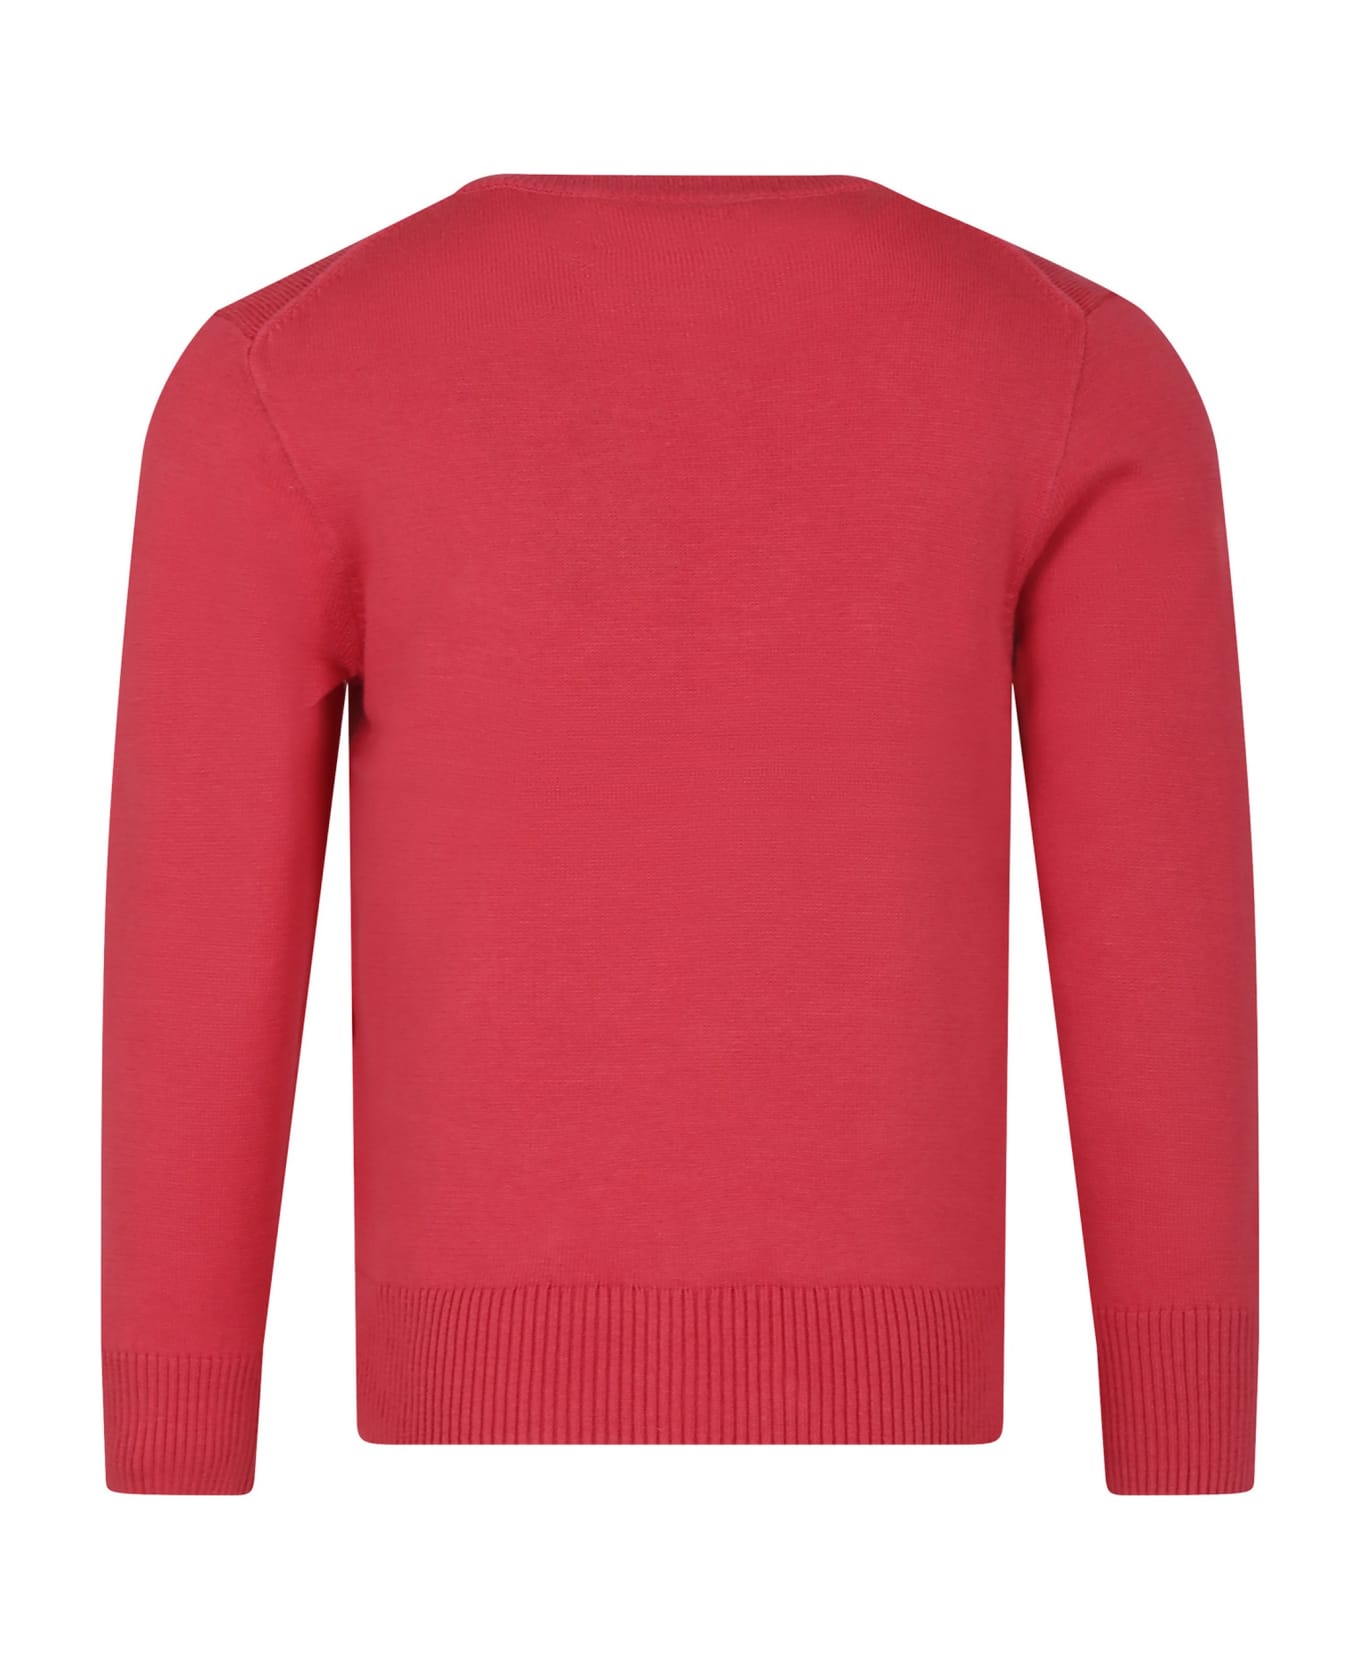 Ralph Lauren Red Sweater For Boy With Embroidery - Red ニットウェア＆スウェットシャツ